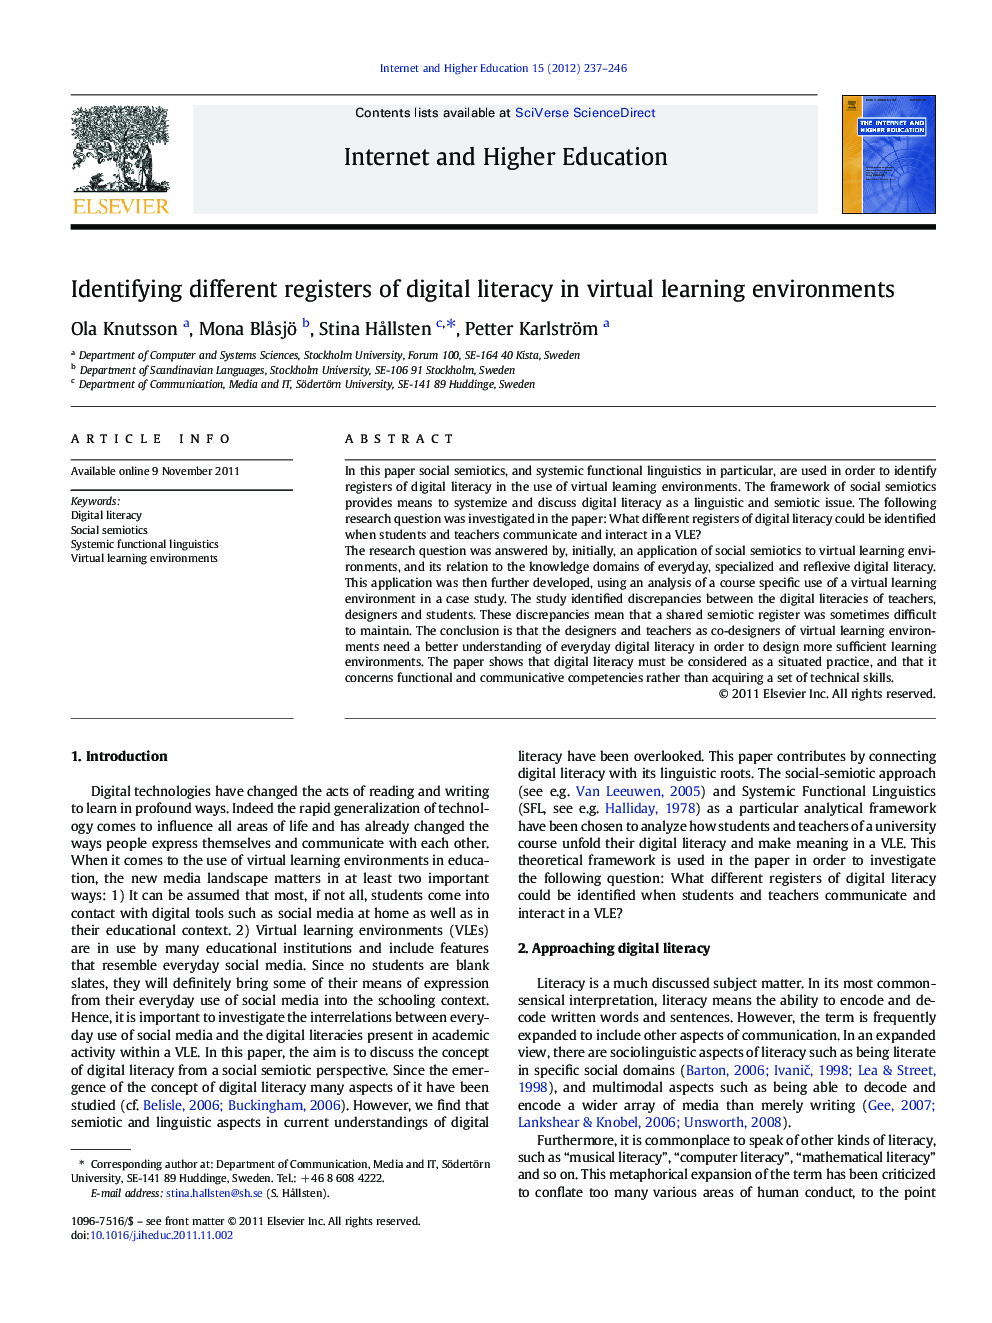 Identifying different registers of digital literacy in virtual learning environments